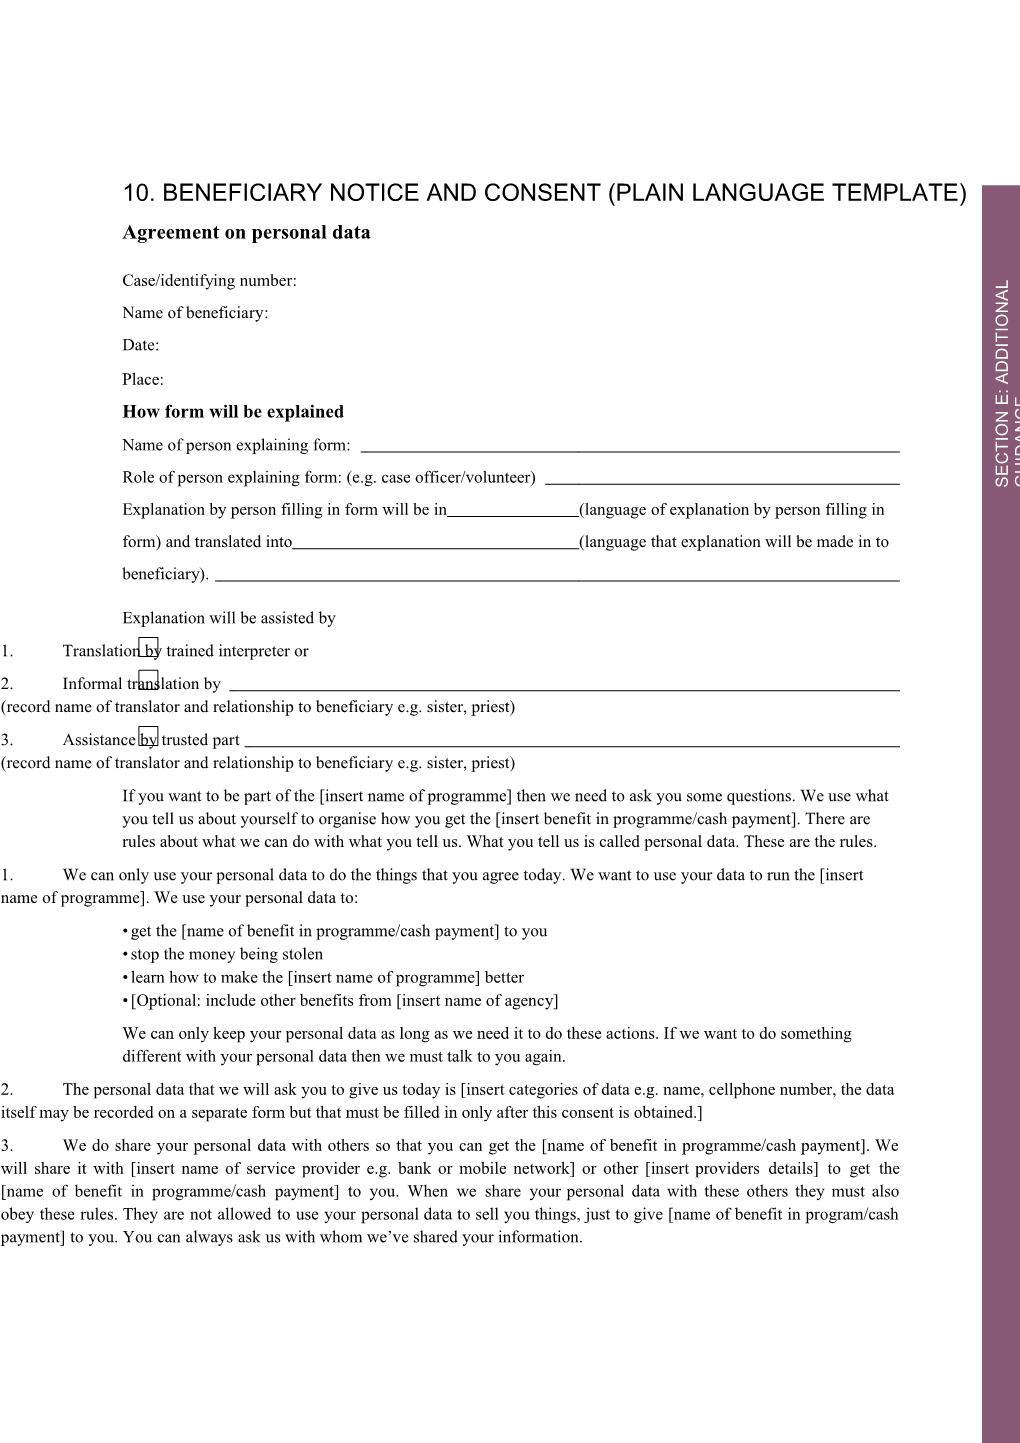 10. Beneficiary Notice and Consent (Plain Language Template)